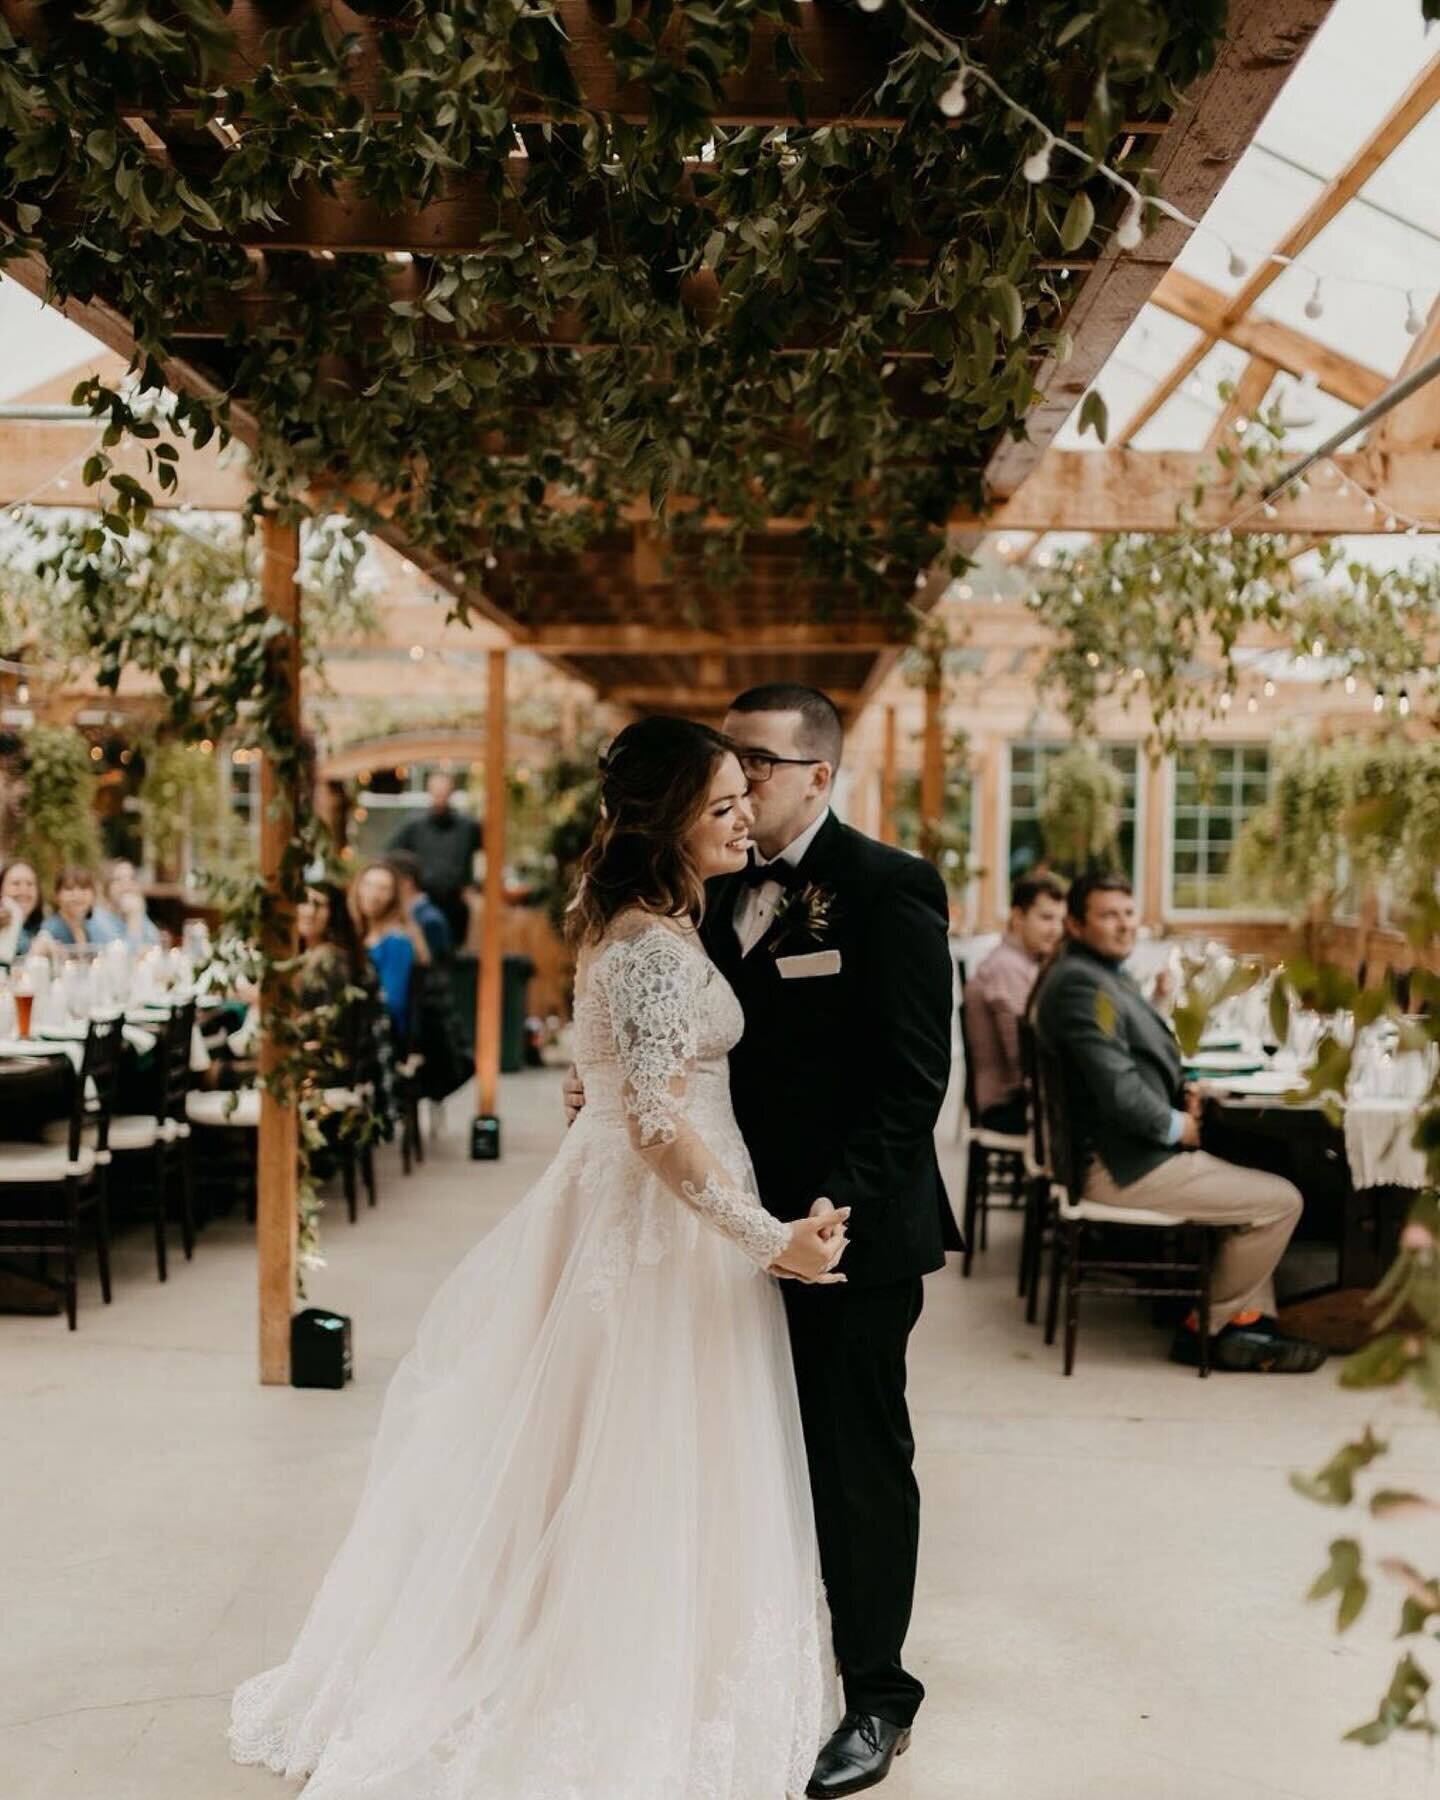 Hidden garden weddings like Mary and Aidan&rsquo;s never disappoint. 🌸🌿

📷: @madelynnmaephotography